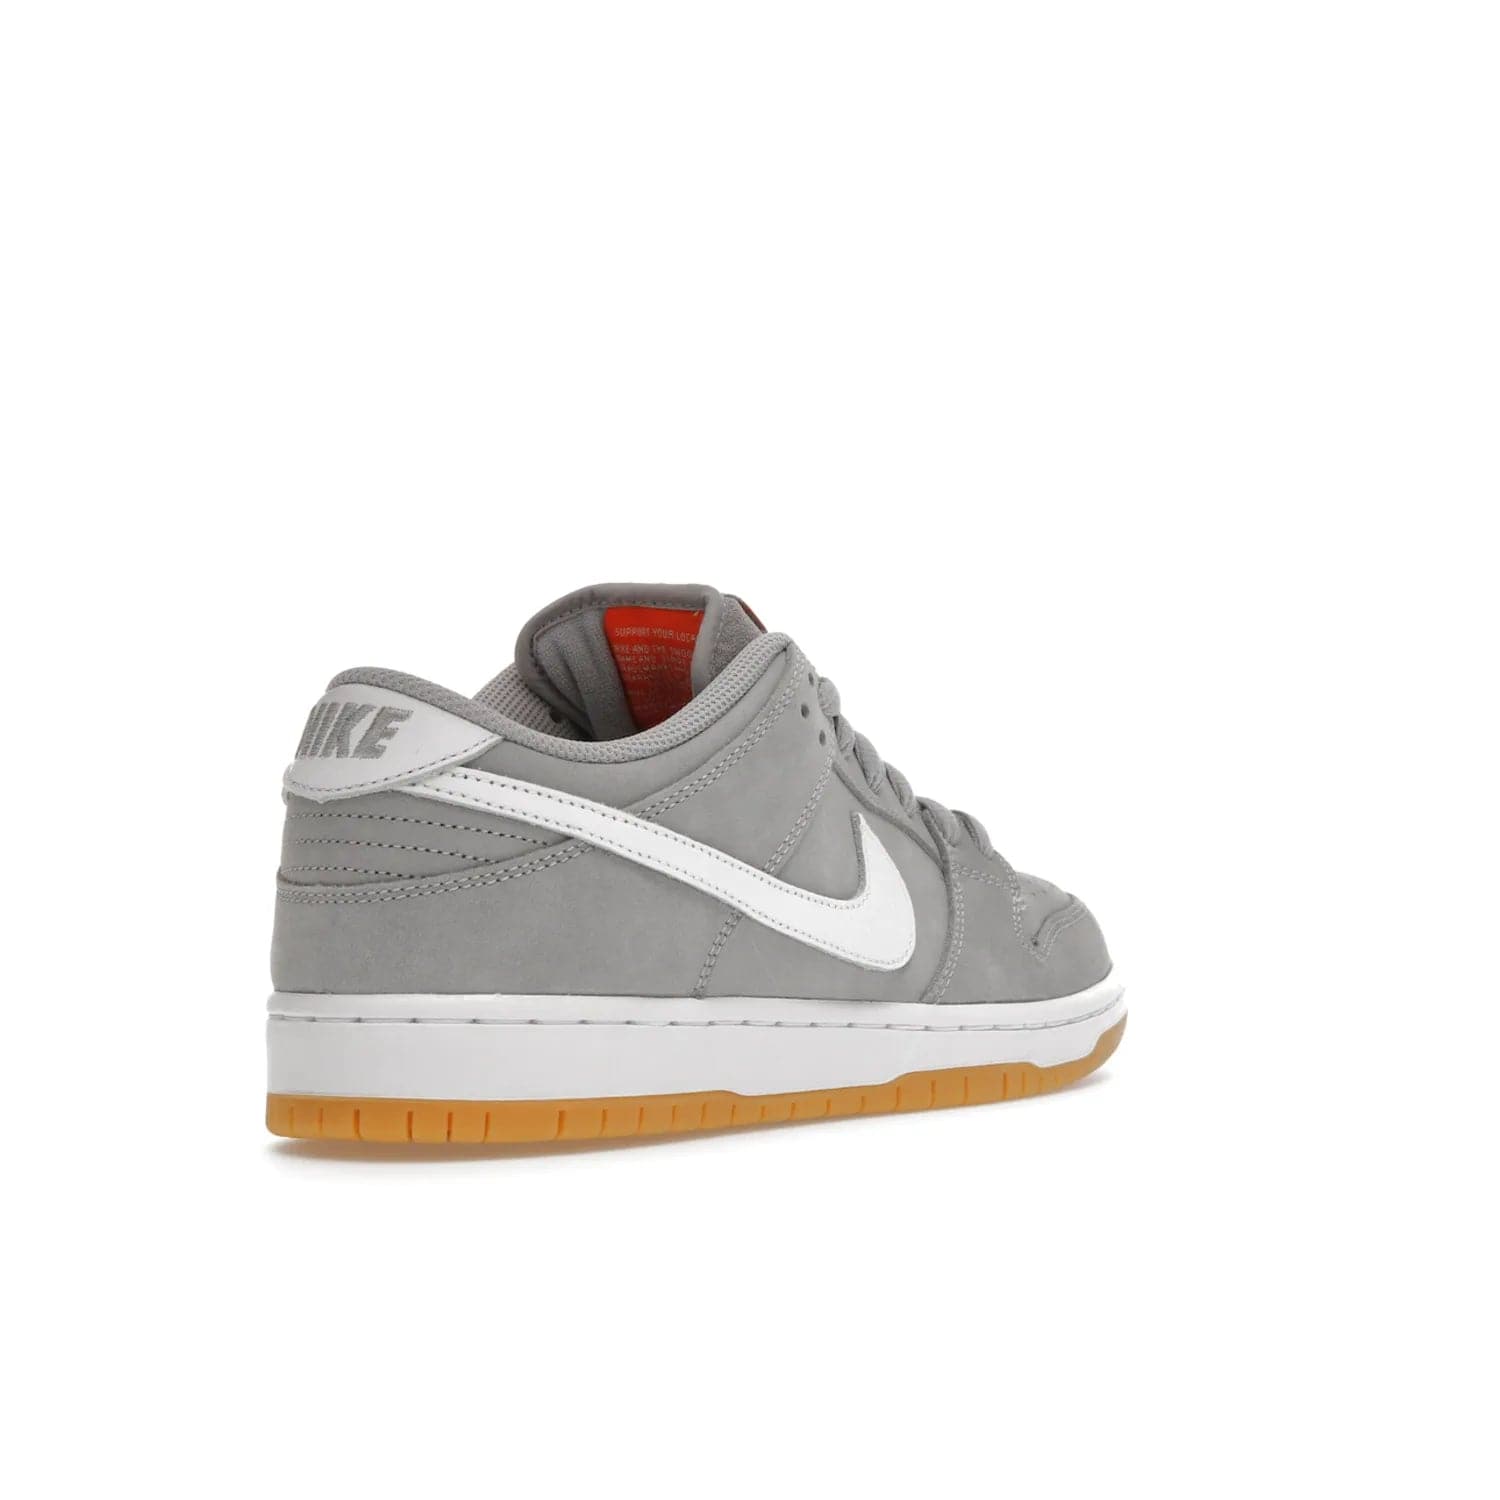 Nike SB Dunk Low Pro ISO Orange Label Wolf Grey Gum - Image 32 - Only at www.BallersClubKickz.com - Introducing Nike's SB Dunk Low Pro ISO Orange Label Wolf Grey Gum - a stylish shoe with a premium Wolf Grey upper, white leather Nike Swoosh, and an eye-catching gum outsole. With special Nike branding and packaging, this shoe adds a unique fashion statement. Out Feb. 24, 2023.